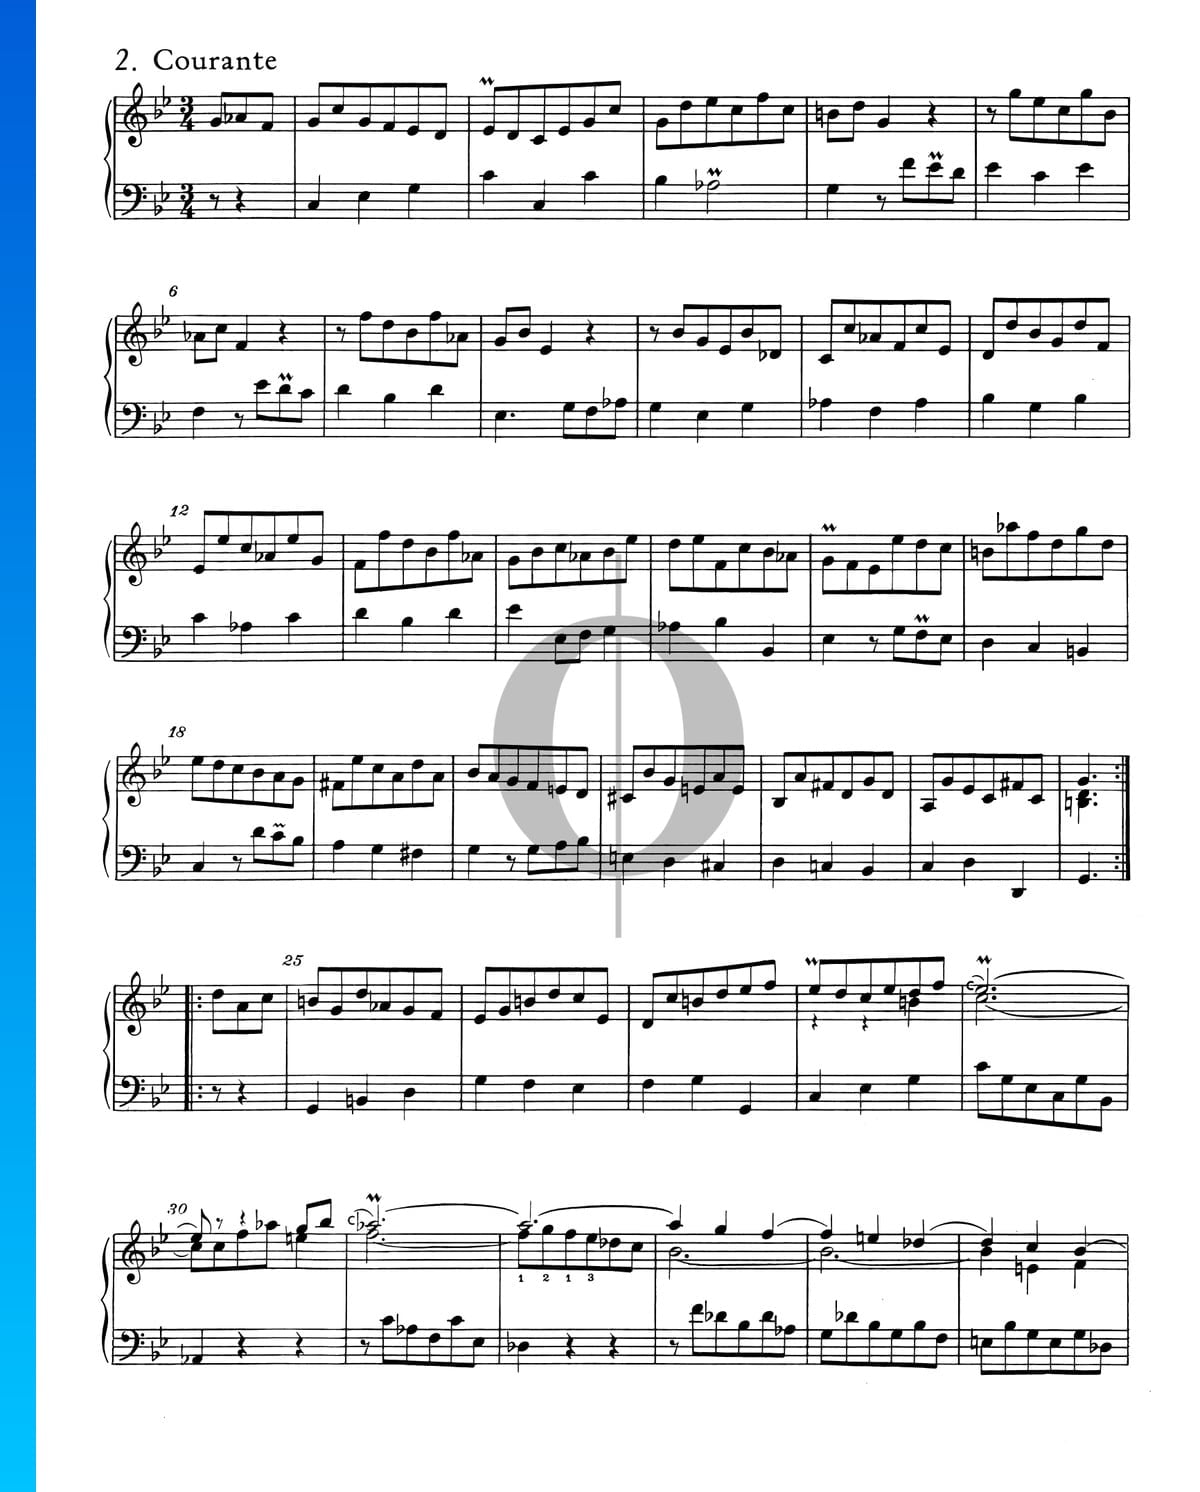 French Suite No. 2 C Minor, BWV 813: 2. Courante Sheet Music (Piano ...